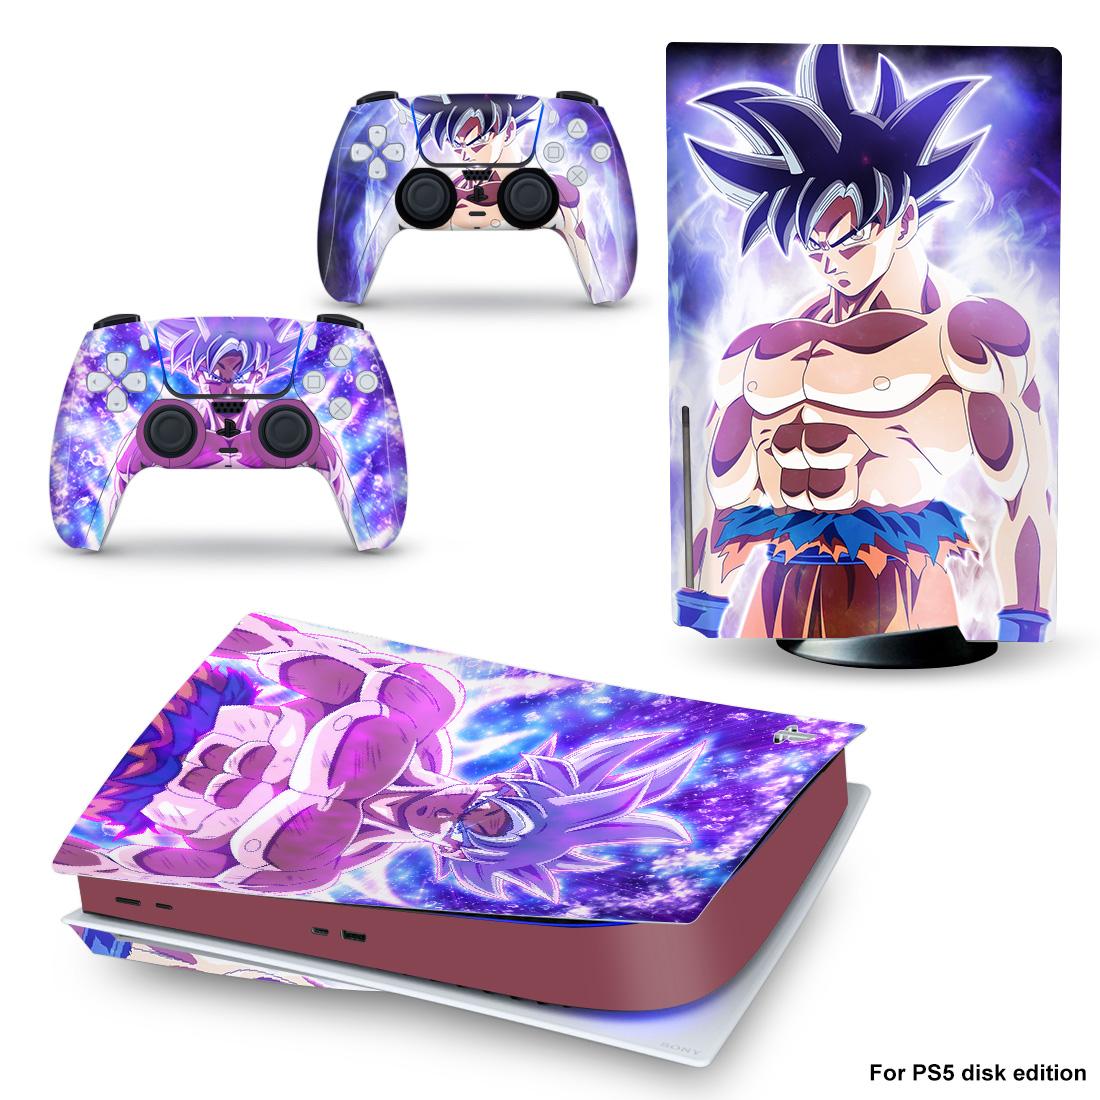 PS5 Stickers Anime Vinyl Skin Sticker for PS5 Disk Edition Slim Console and 2 Controllers Decal Cover